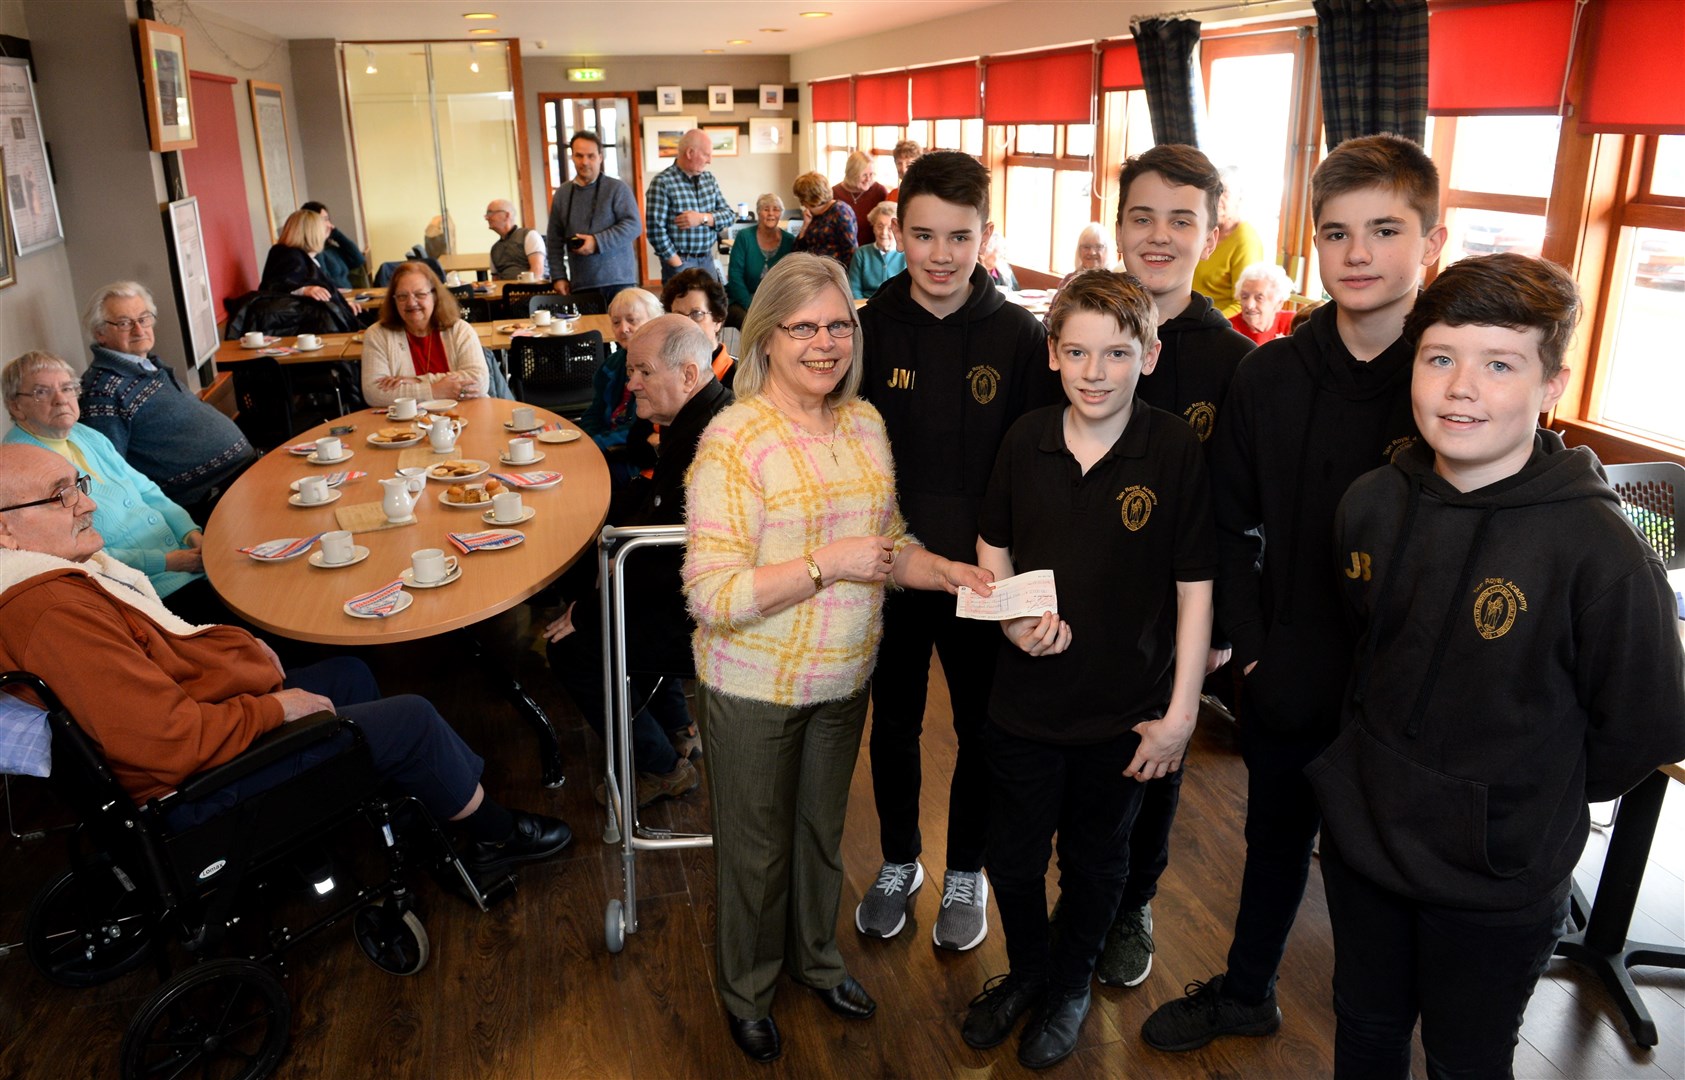 June Dingley, vice-chairman of Seaboard Cares, receives a £3000 cheque from Youth Philanthropy Initiative pupils of Tain Royal Academy. They are (from left) Jamie Munro, Joe Gardener, Torran McCann, Noah Walkington and Johnie Beattie. Picture: Gary Anthony. Image No.043359.